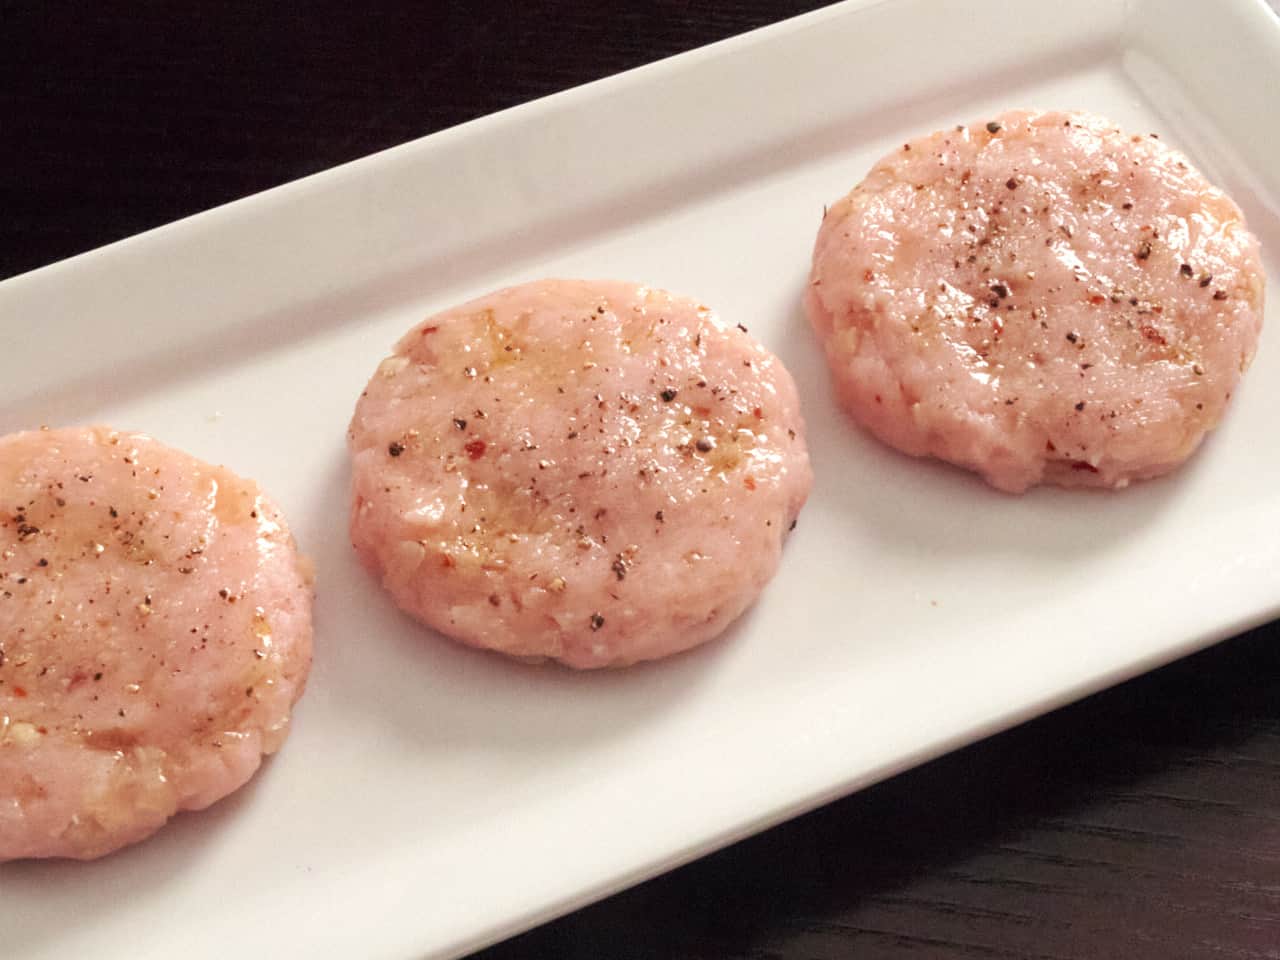 Three raw turkey burgers topped with salt, pepper, and olive oil on a white plate.